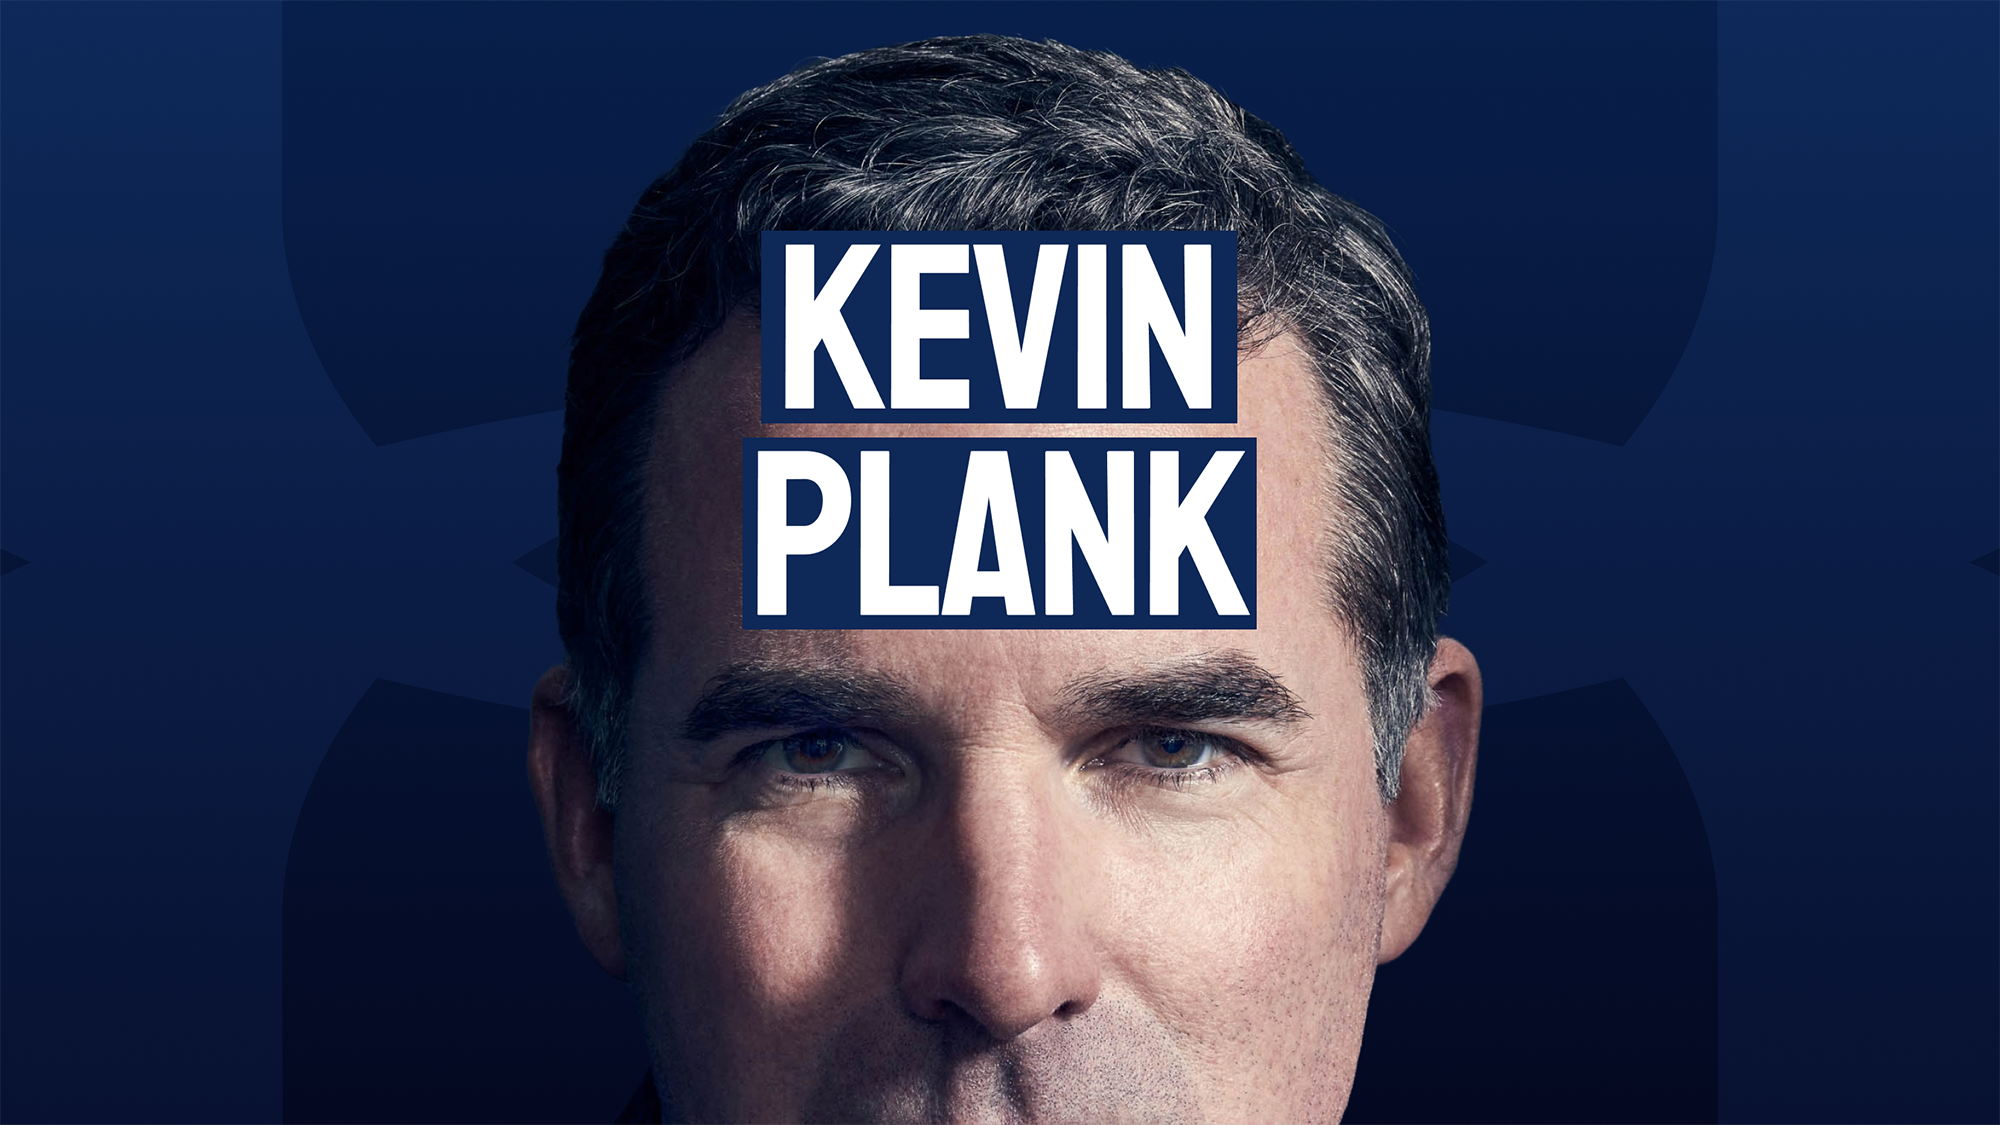 Kevin Plank - the Founder of Under Armour